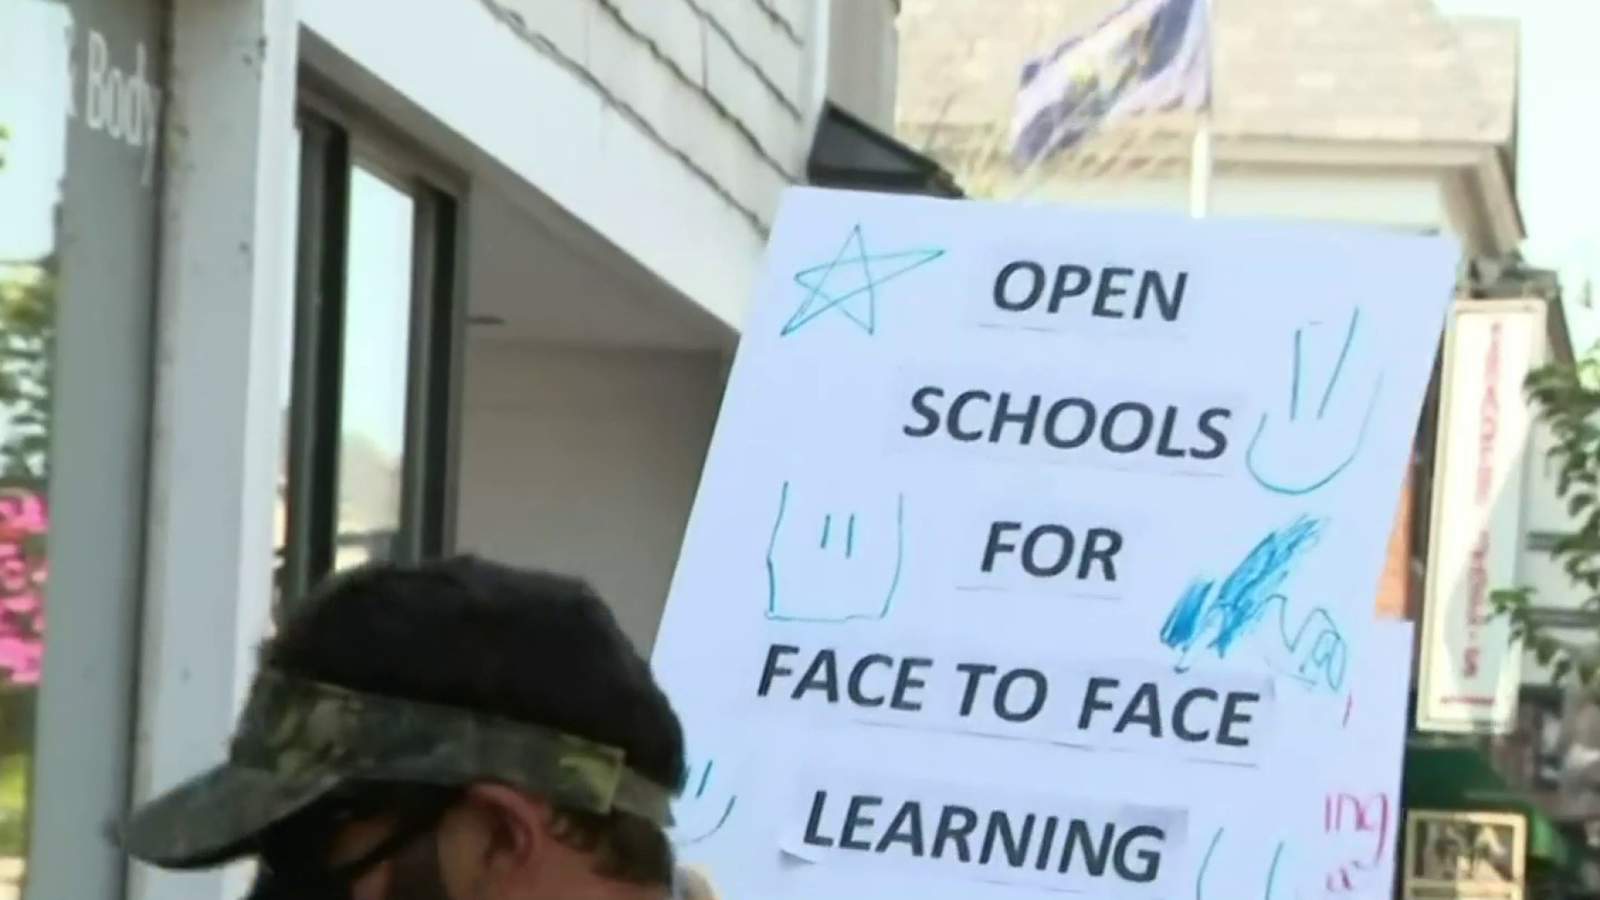 Parents rally for face-to-face learning in Grosse Pointe